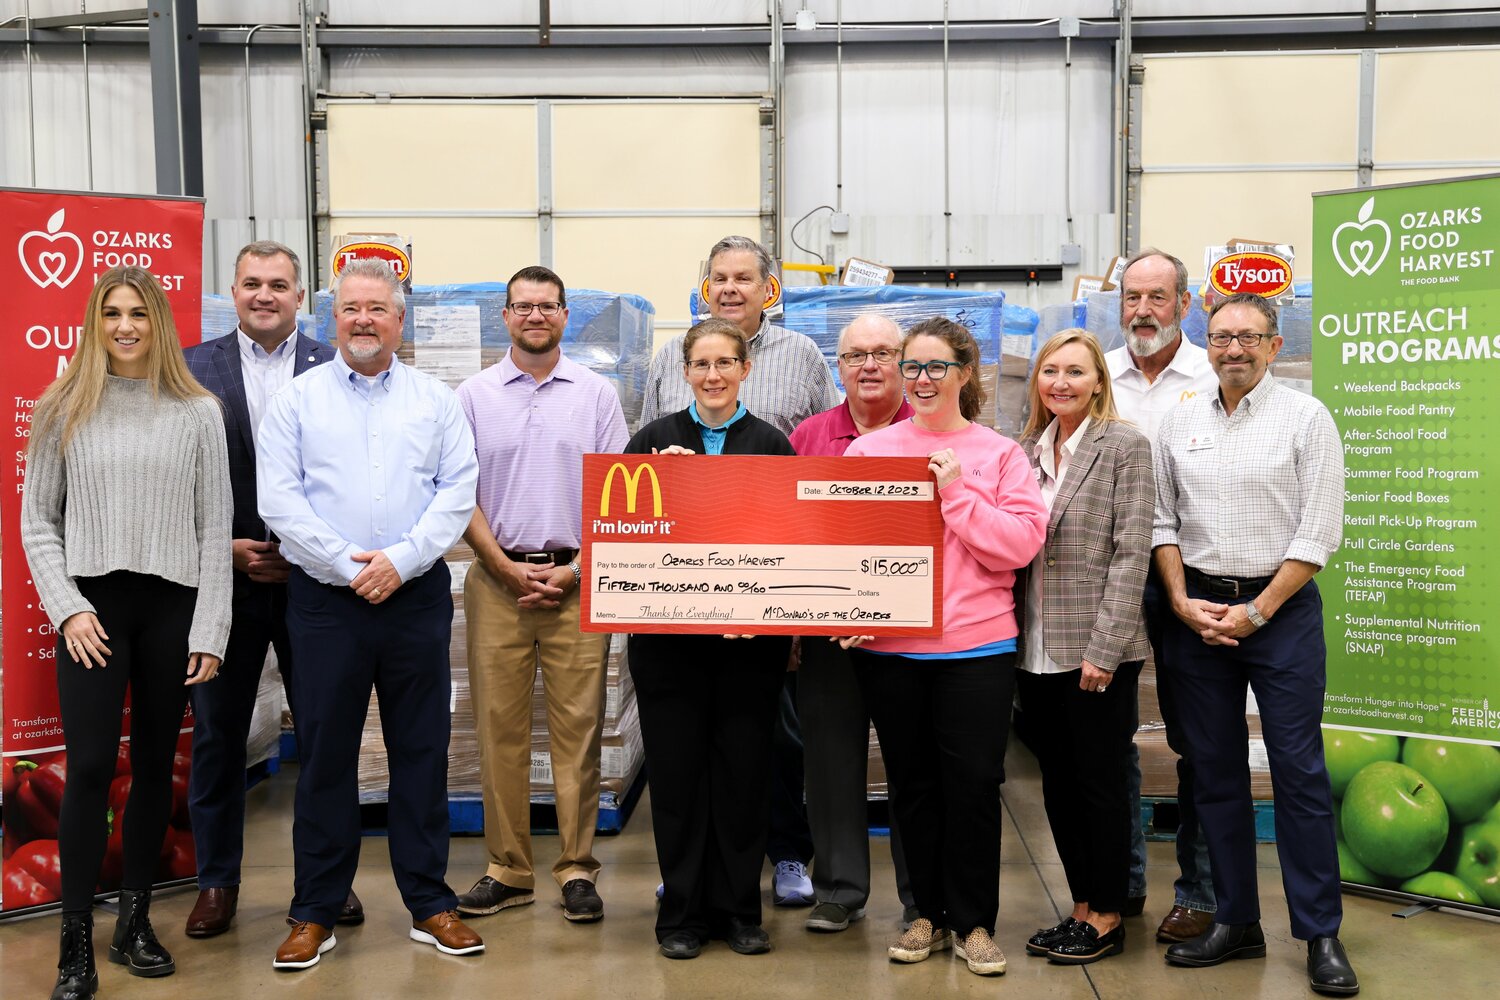 Officials with McDonald’s, Tyson Foods Inc. and iHeartRadio Springfield present donations of $15,000 and 40,000 pounds of chicken to Ozarks Food Harvest.